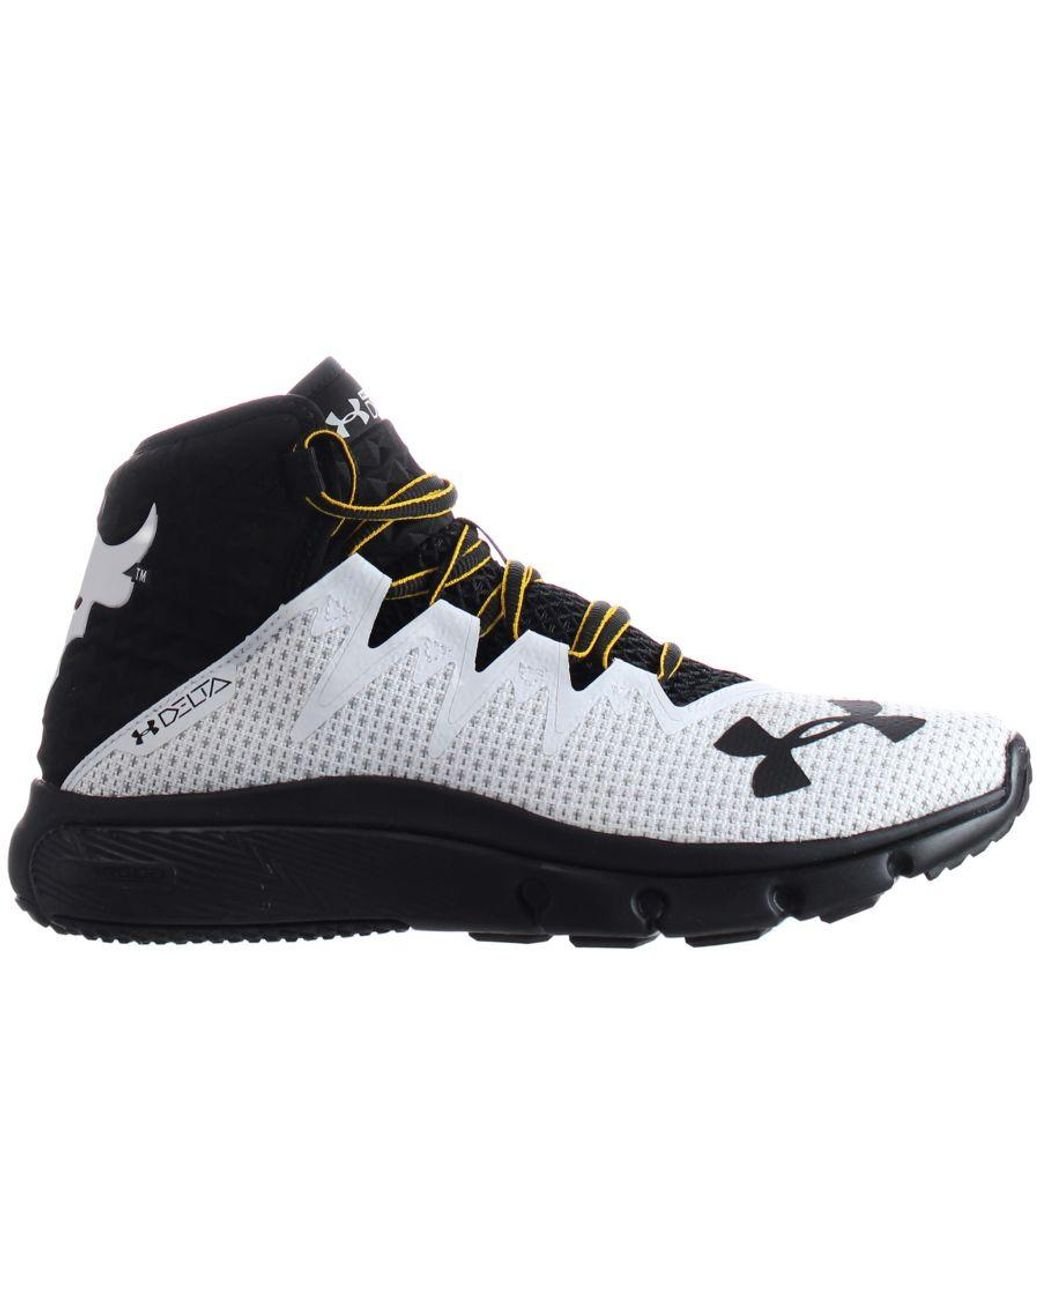 Under Armour Project Rock Delta White Trainers in Black for Men